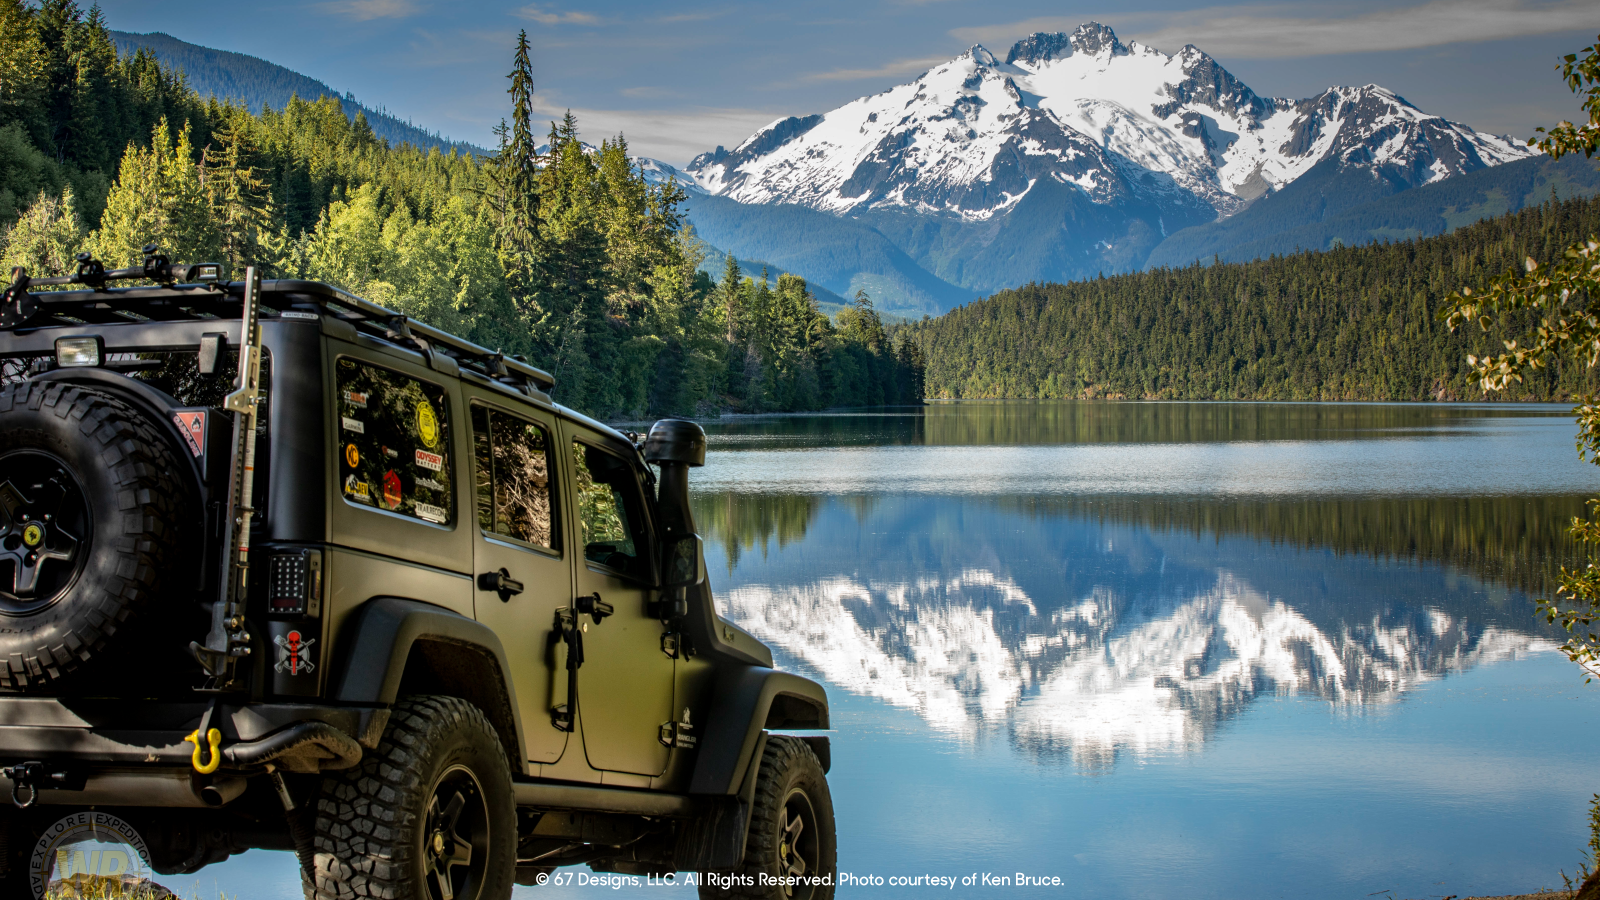 Jeep overlooking snow capped mountains